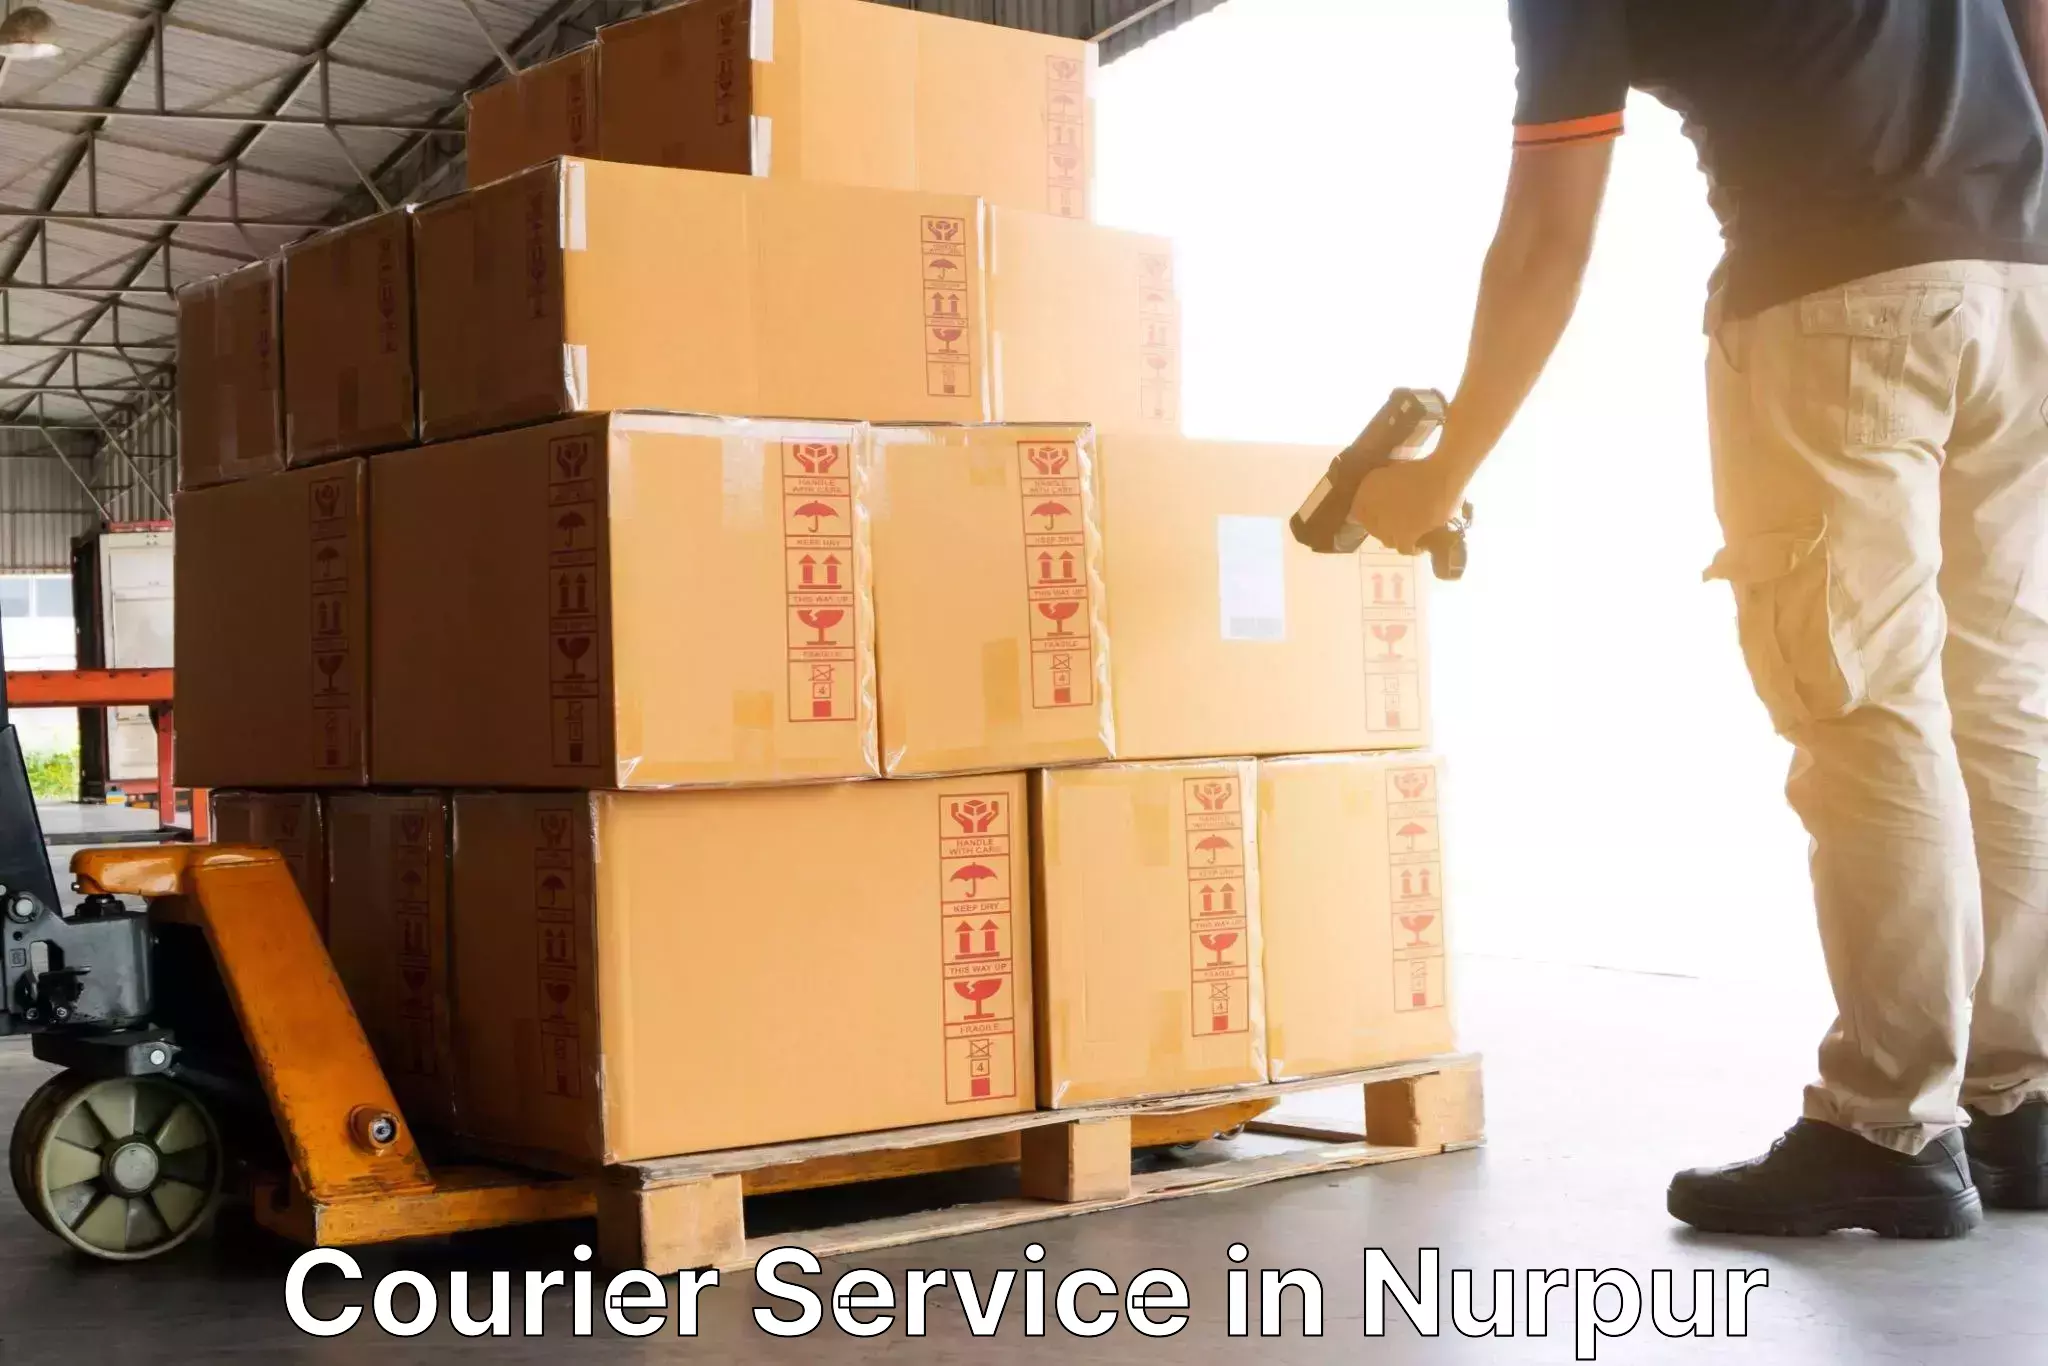 Same-day delivery options in Nurpur